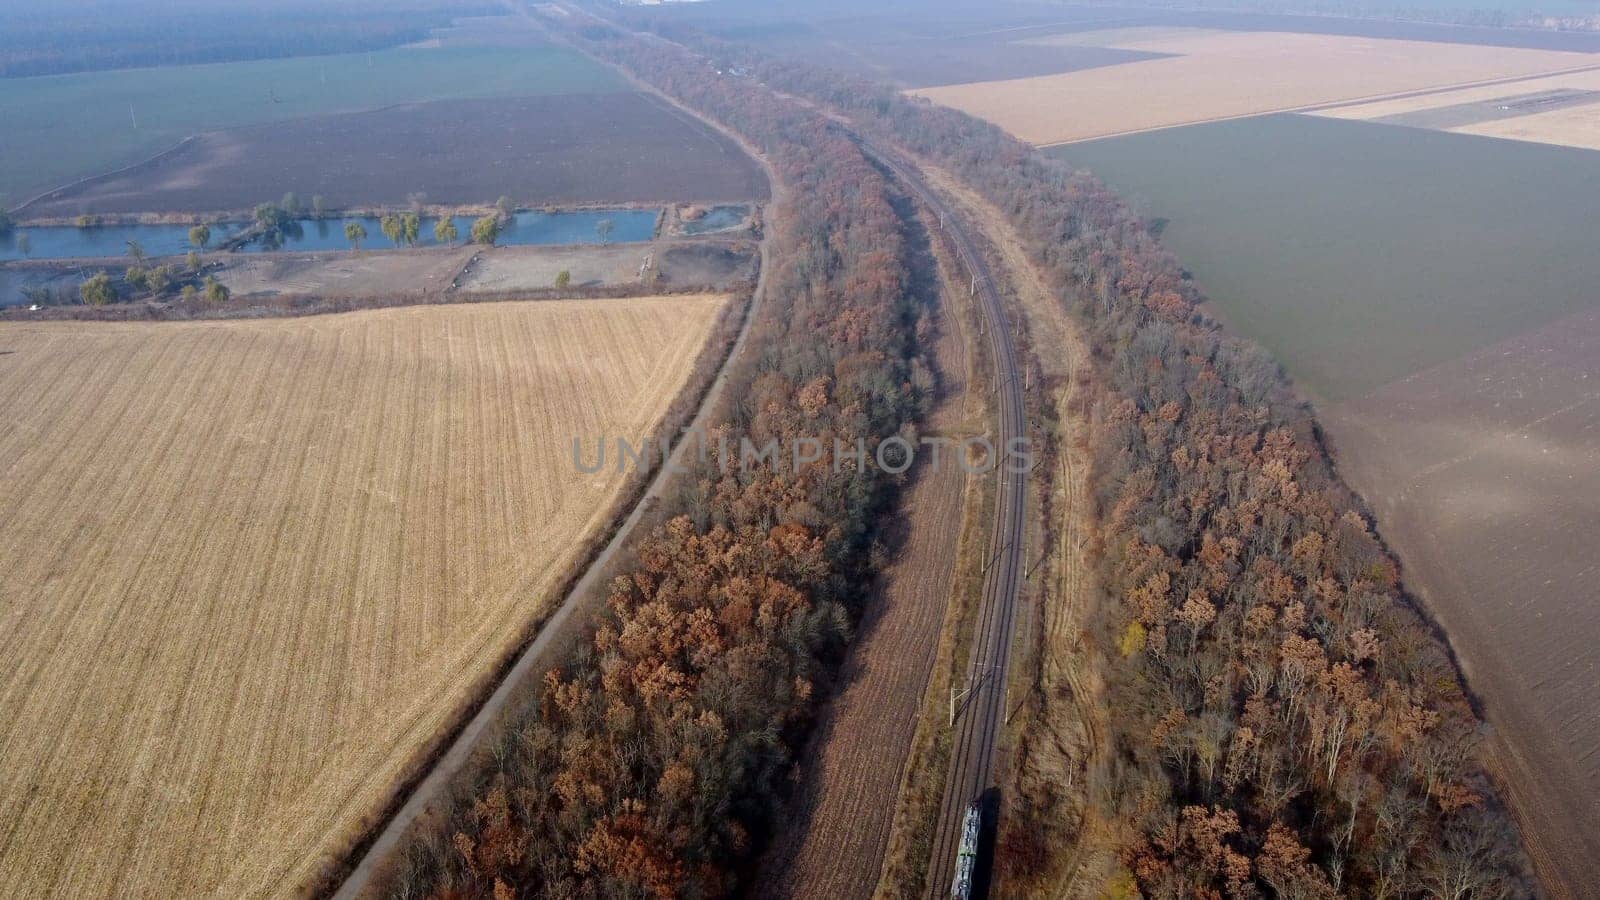 Panoramic View of Moving Freight Train Along Railway Tracks Among Trees Between Agricultural Fields on an Autumn Day. Landscape Freight Cars or Railway Wagon Rides on Railroad. Top View Rail freight